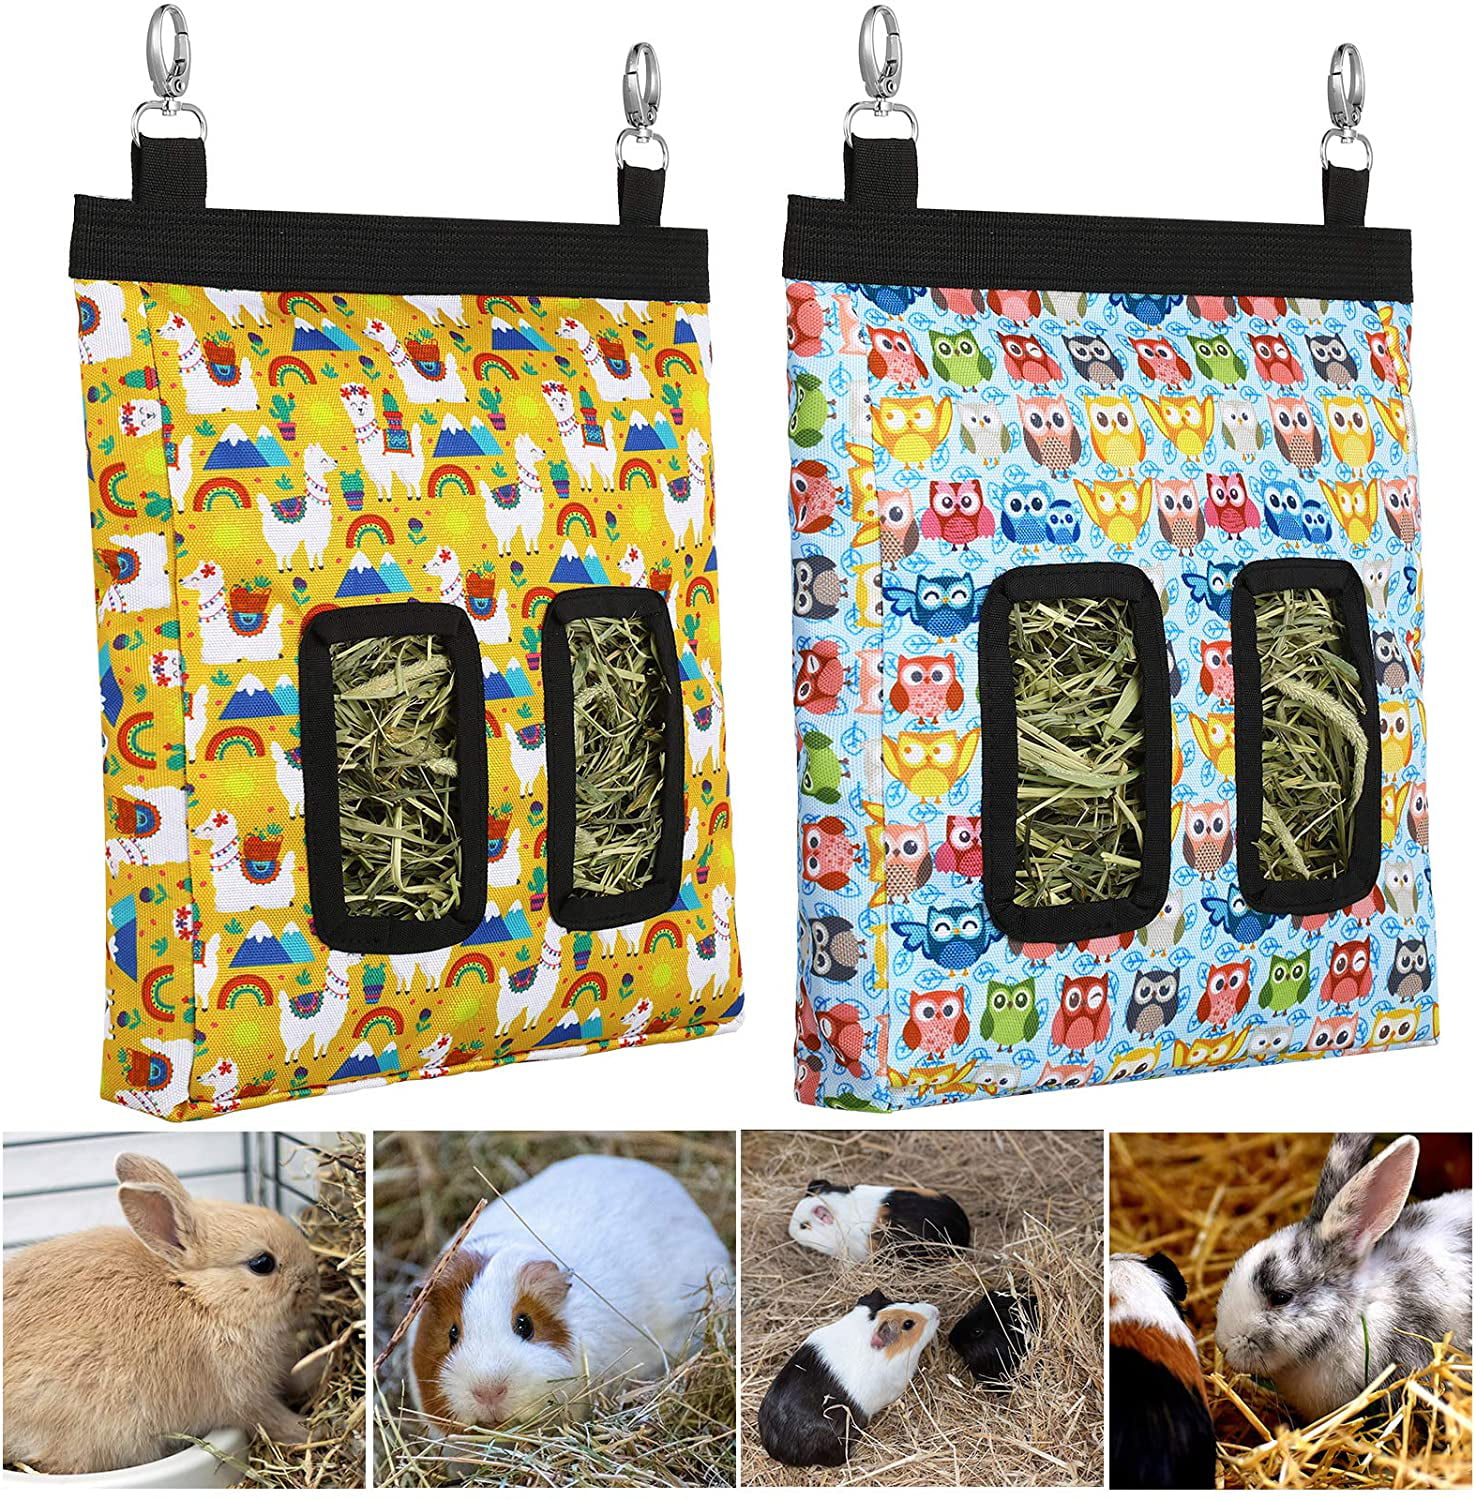 2 Pieces Rabbit Hay Feeder Bag Guinea Pig Hay Bag Small Animal Cute Hay Feeder Bag Hanging Feeder Sack Storage with 2 Holes for Rabbit Guinea Pig Chinchilla Hamsters Small Pets